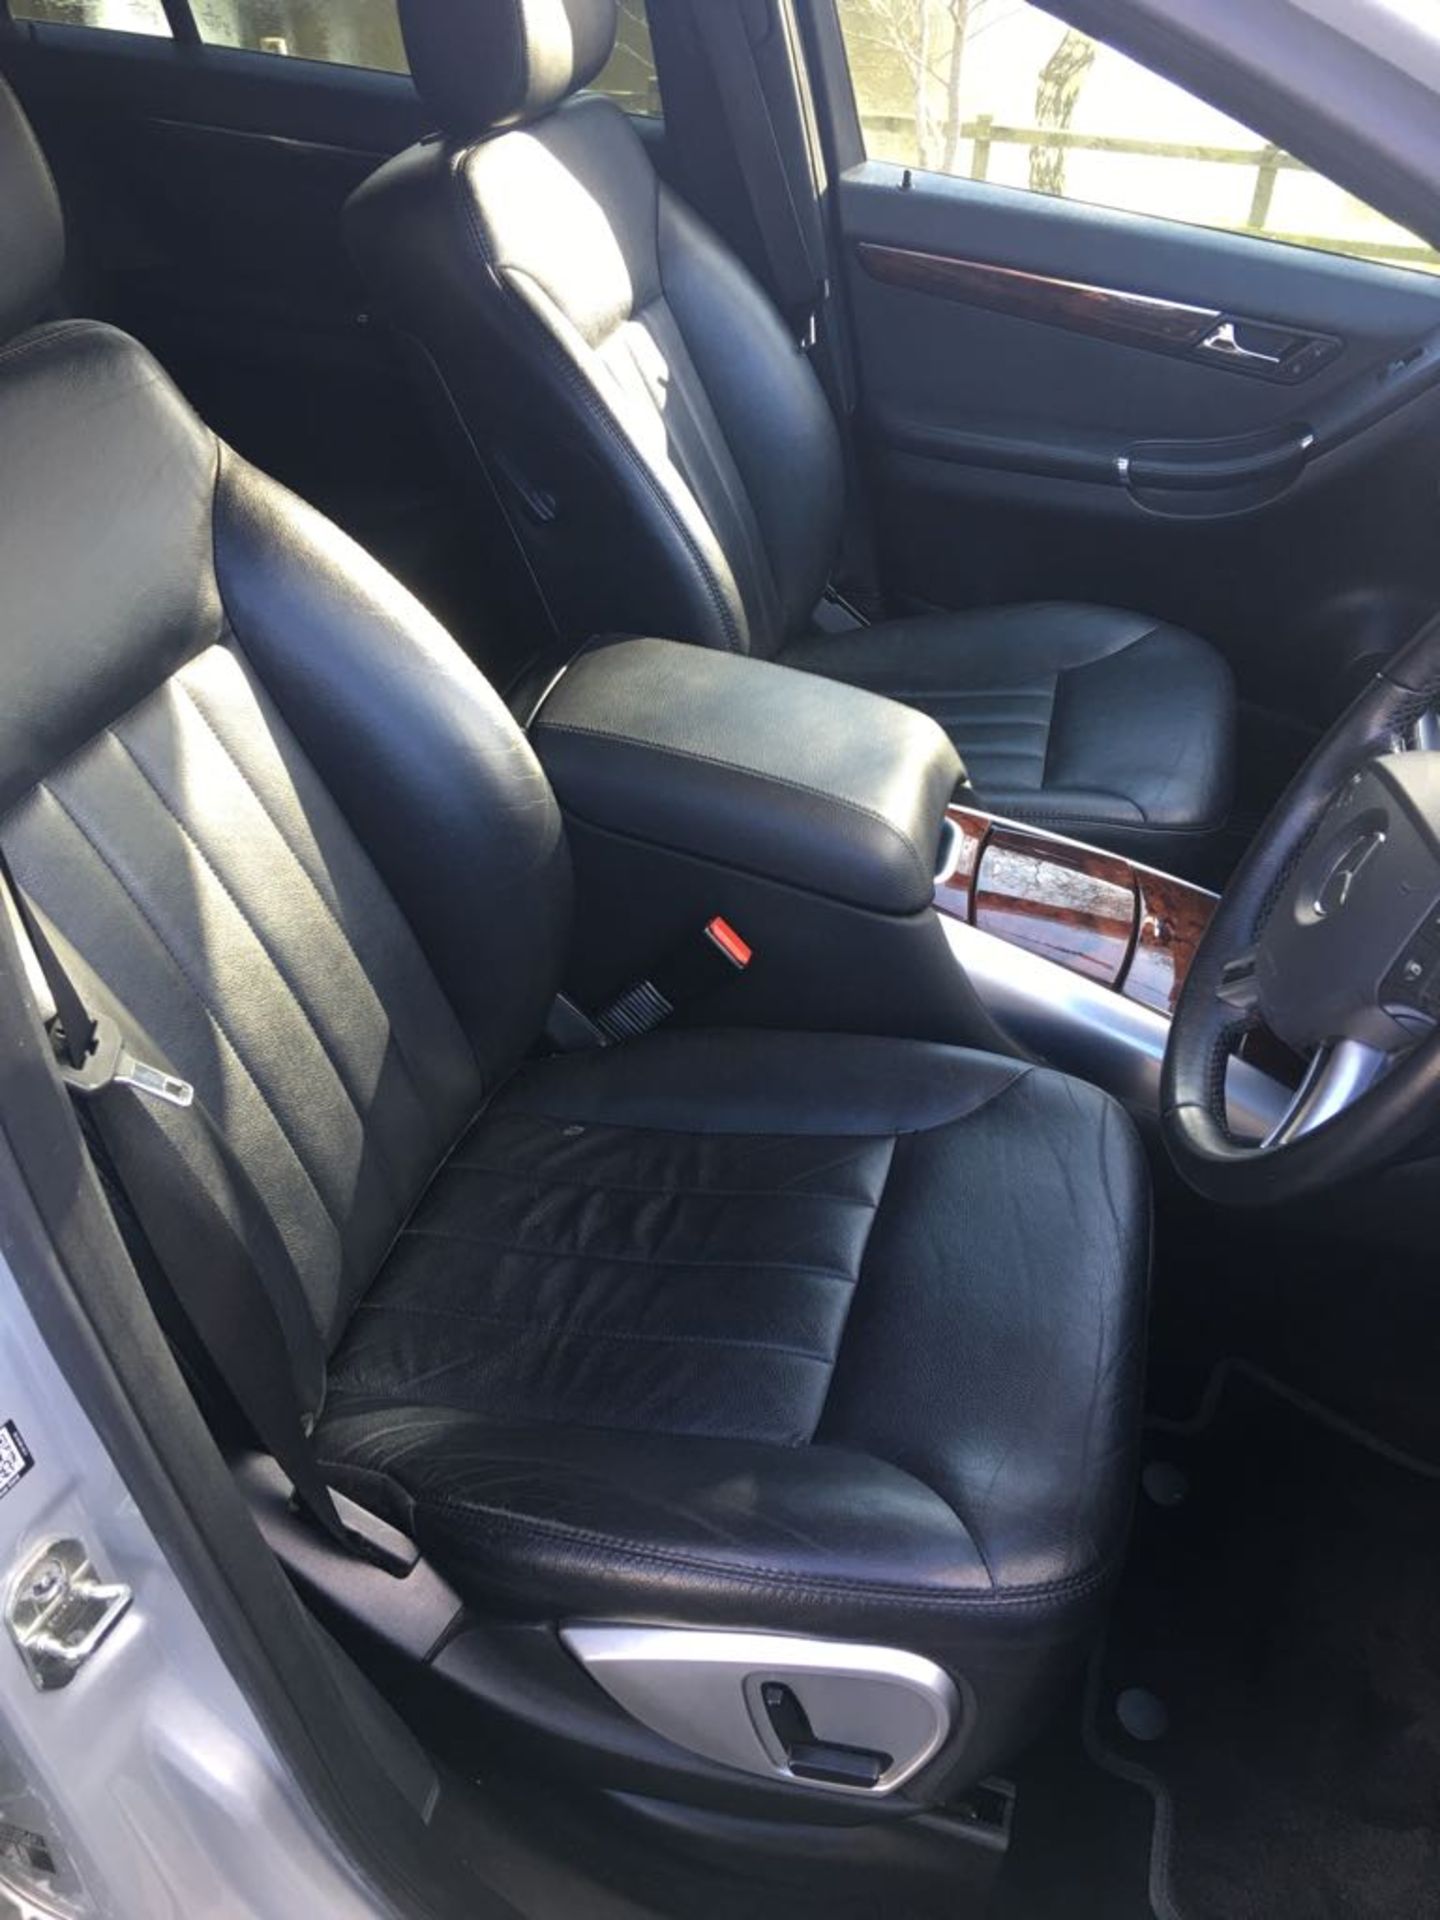 2007 MERCEDES BENZ R280 SE CDI AUTO **6 SEATER LEATHER** - Image 9 of 18